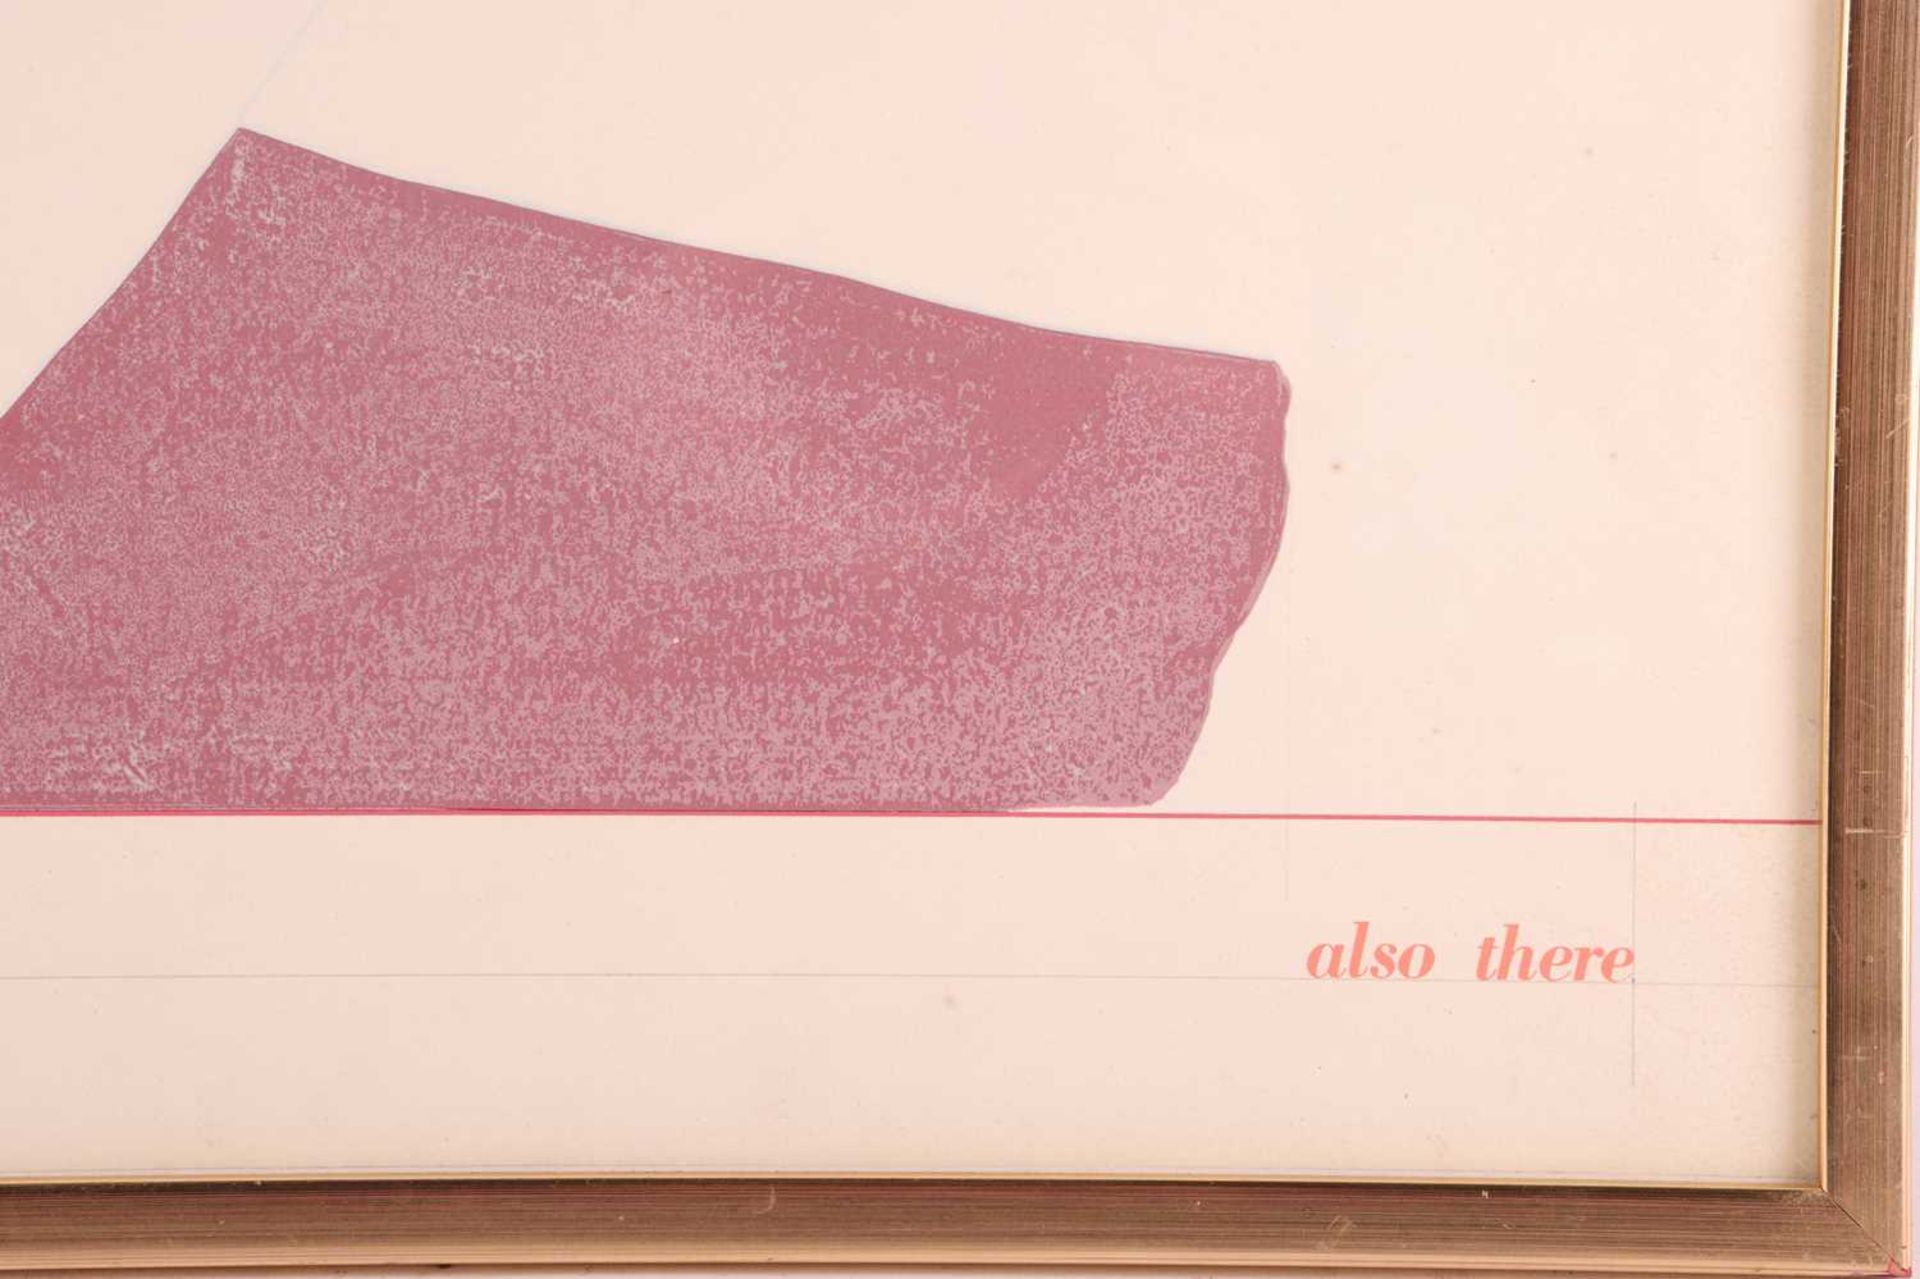 Derrick Greaves (1927-2002), 'Alter Alter Also There', screenprint, unsigned, 46 cm x 62 cm, framed  - Image 3 of 5